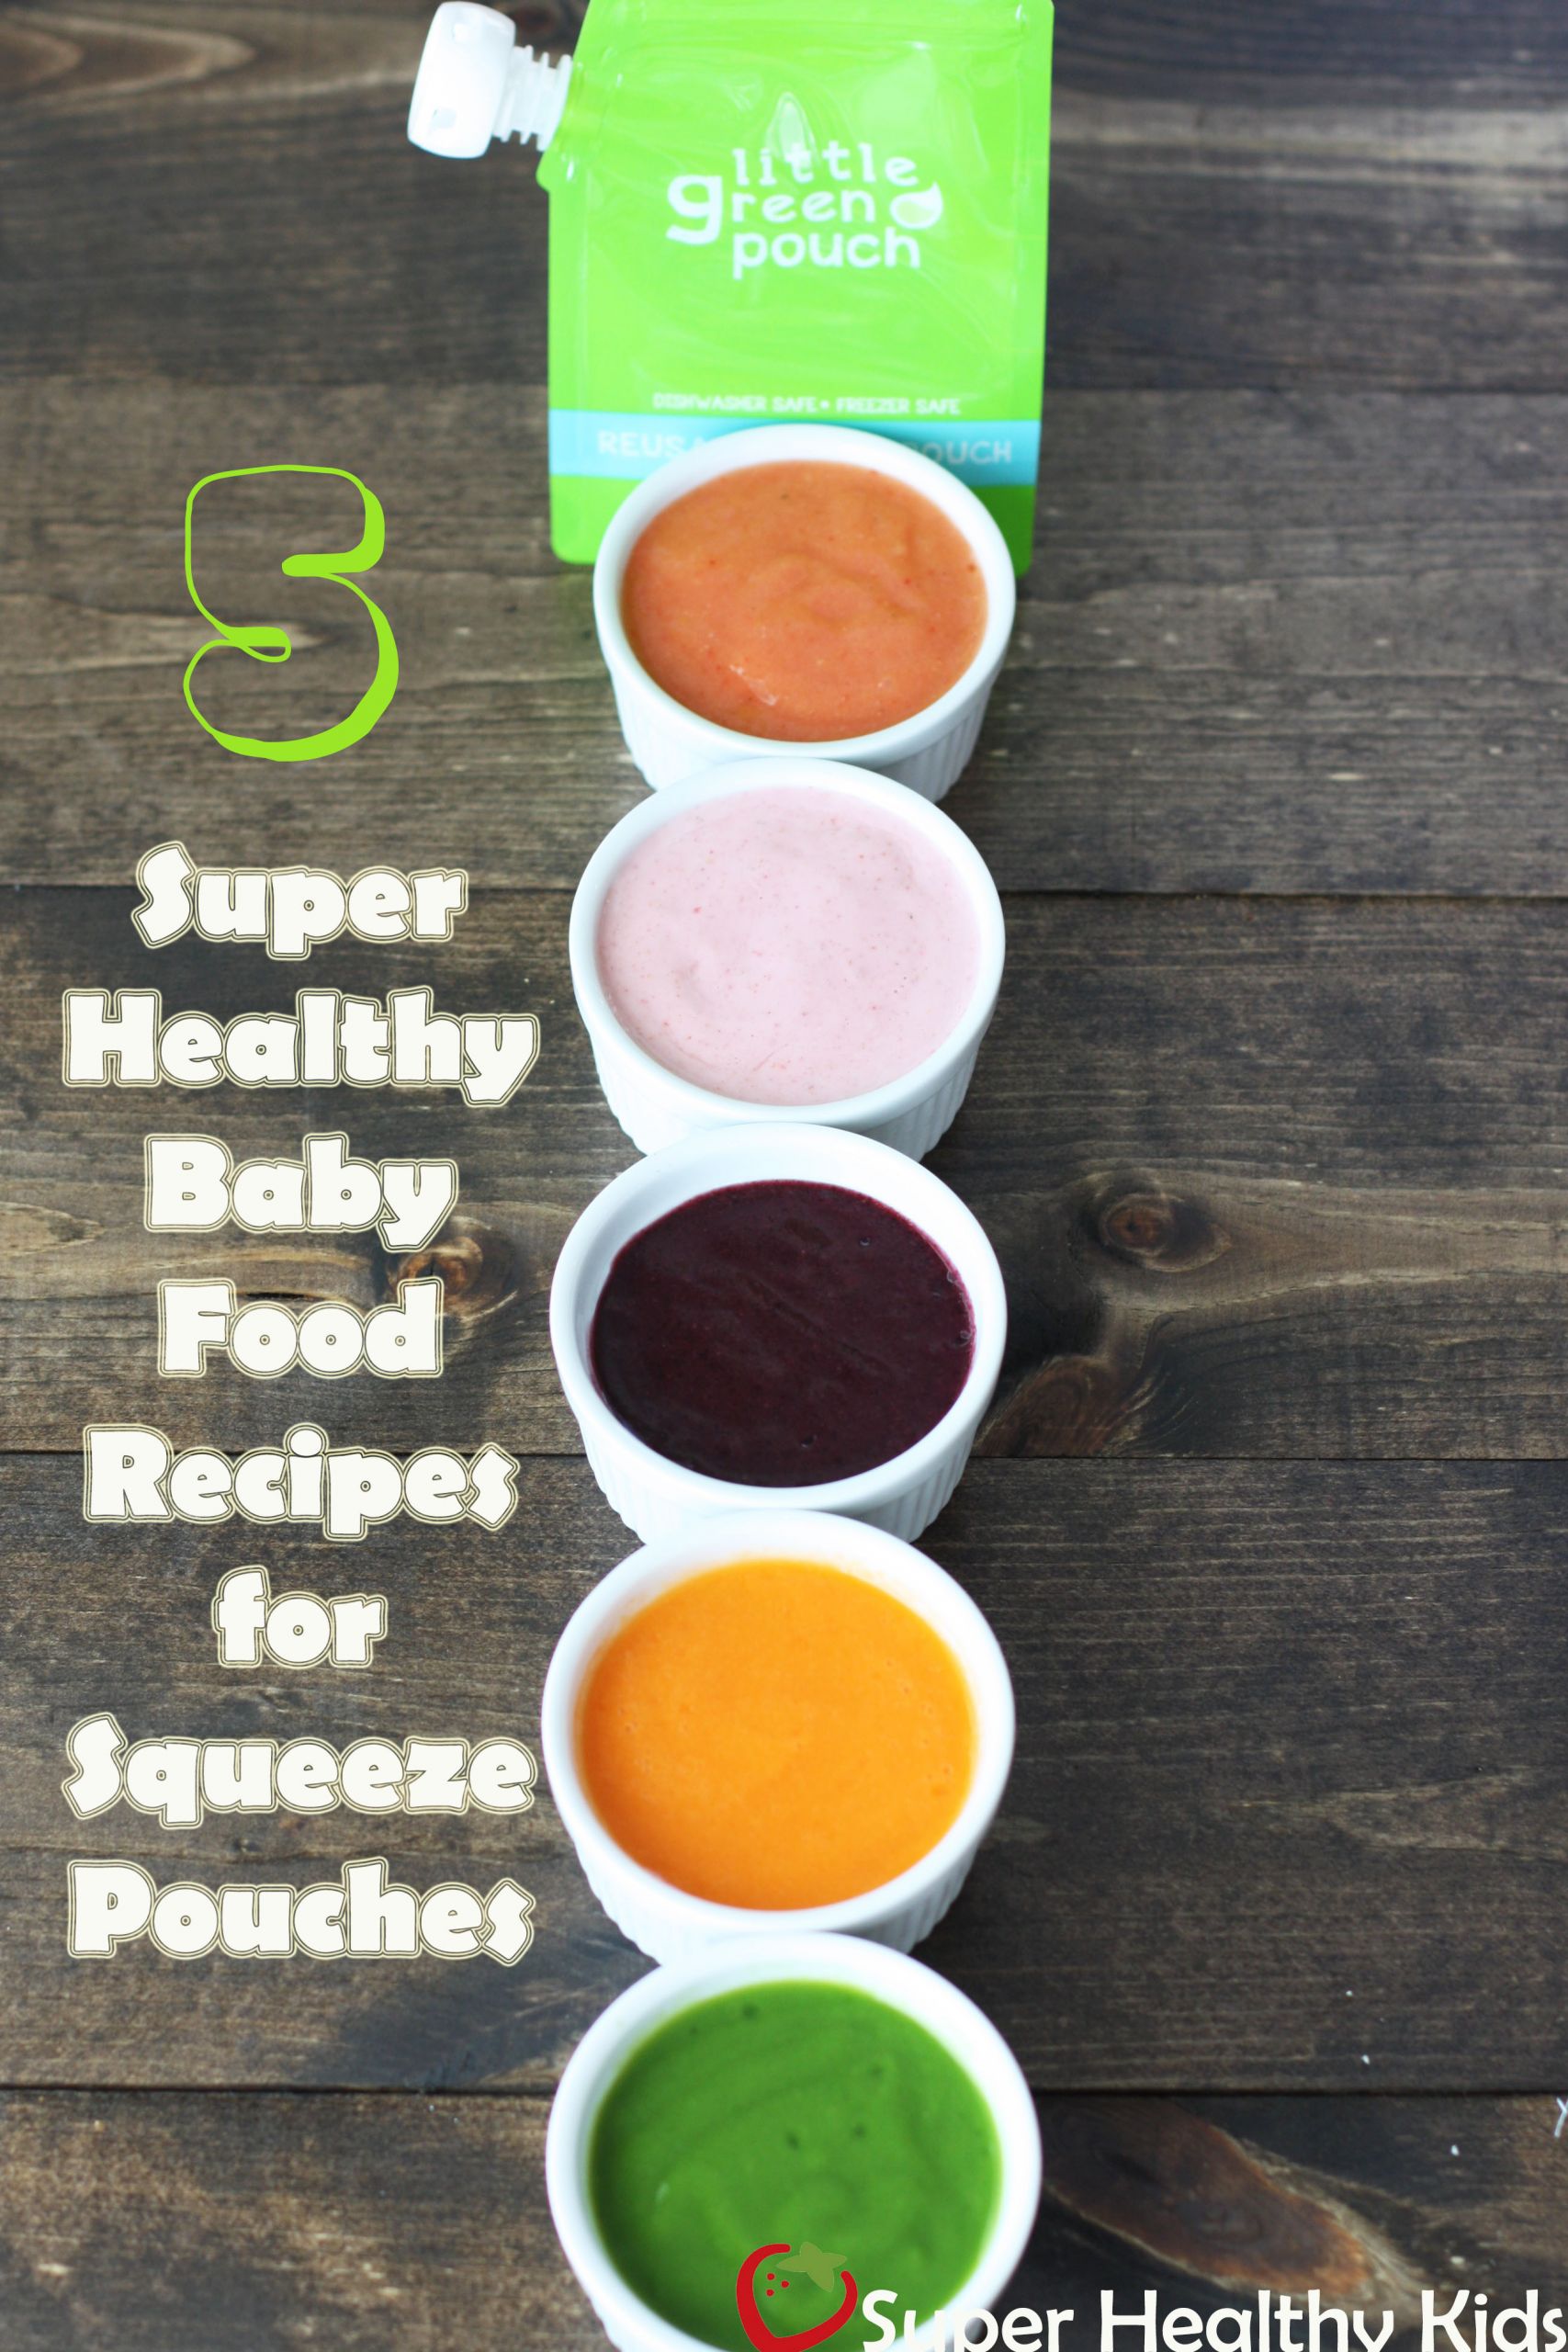 Baby Pouch Recipes
 5 Super Healthy Baby Food Recipes for Squeeze Pouches